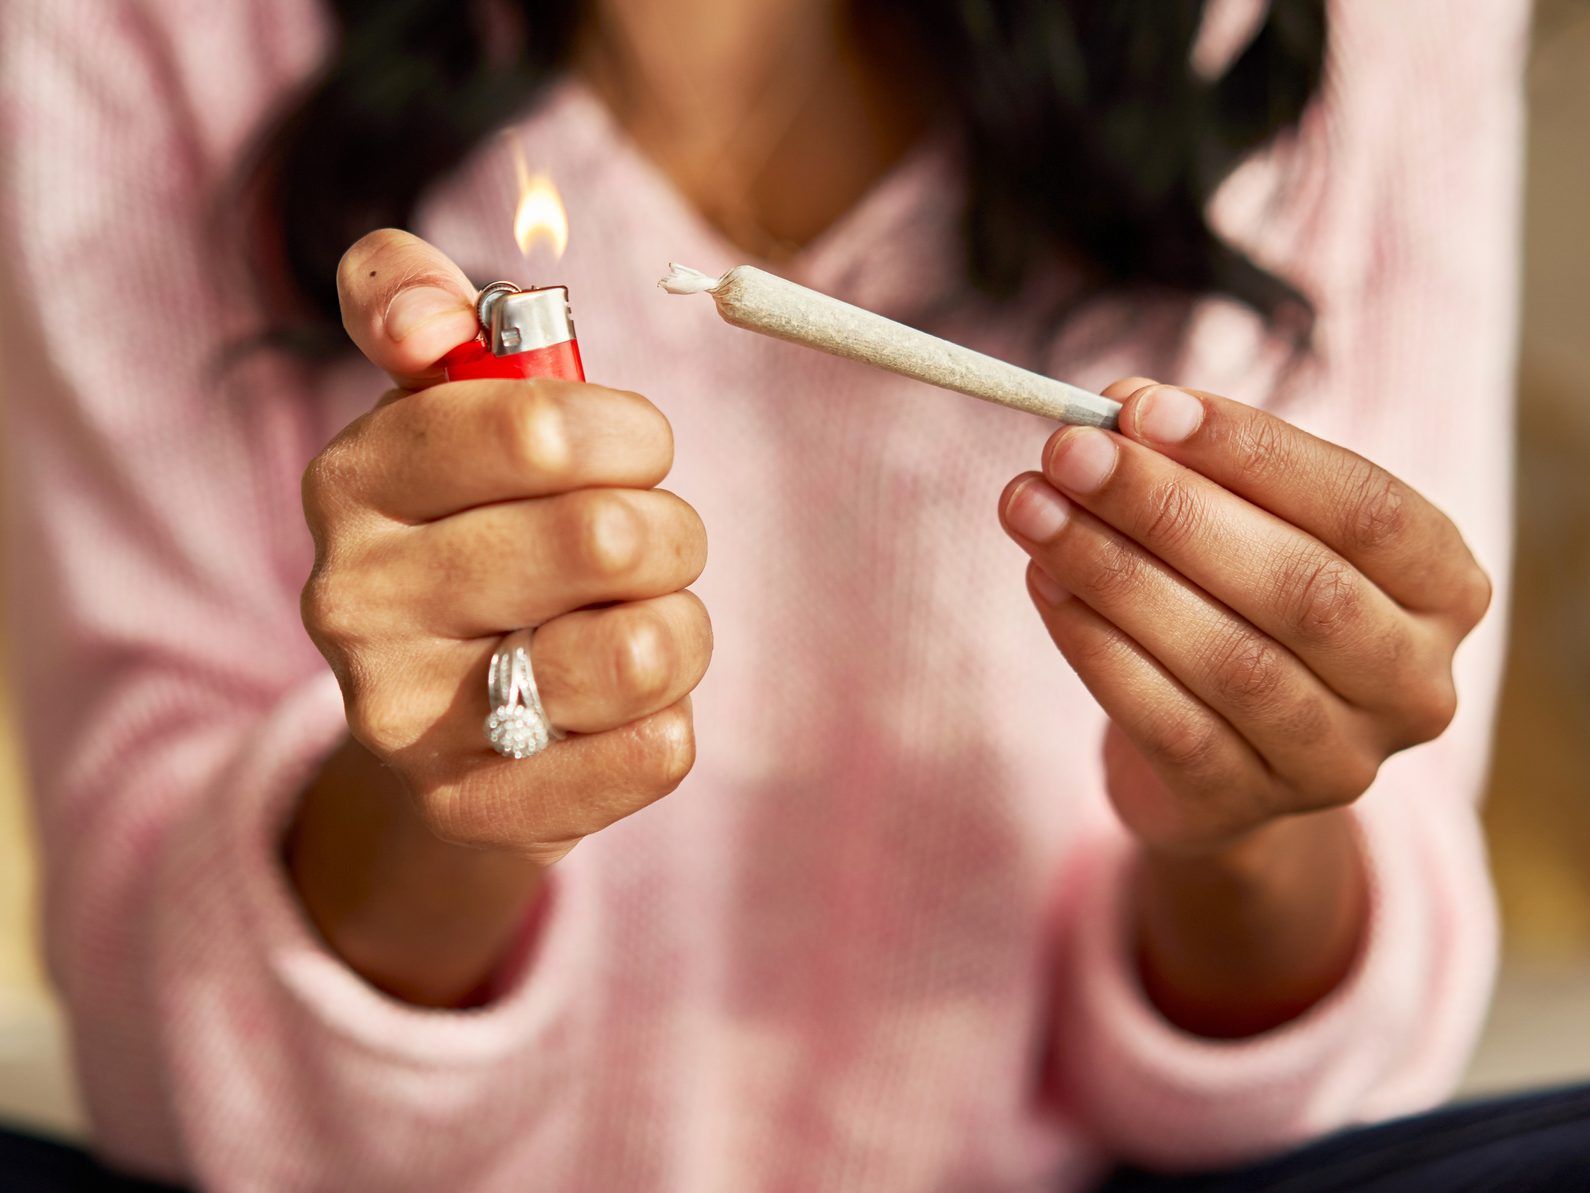 A study found a link between smoking weed and heart disease.